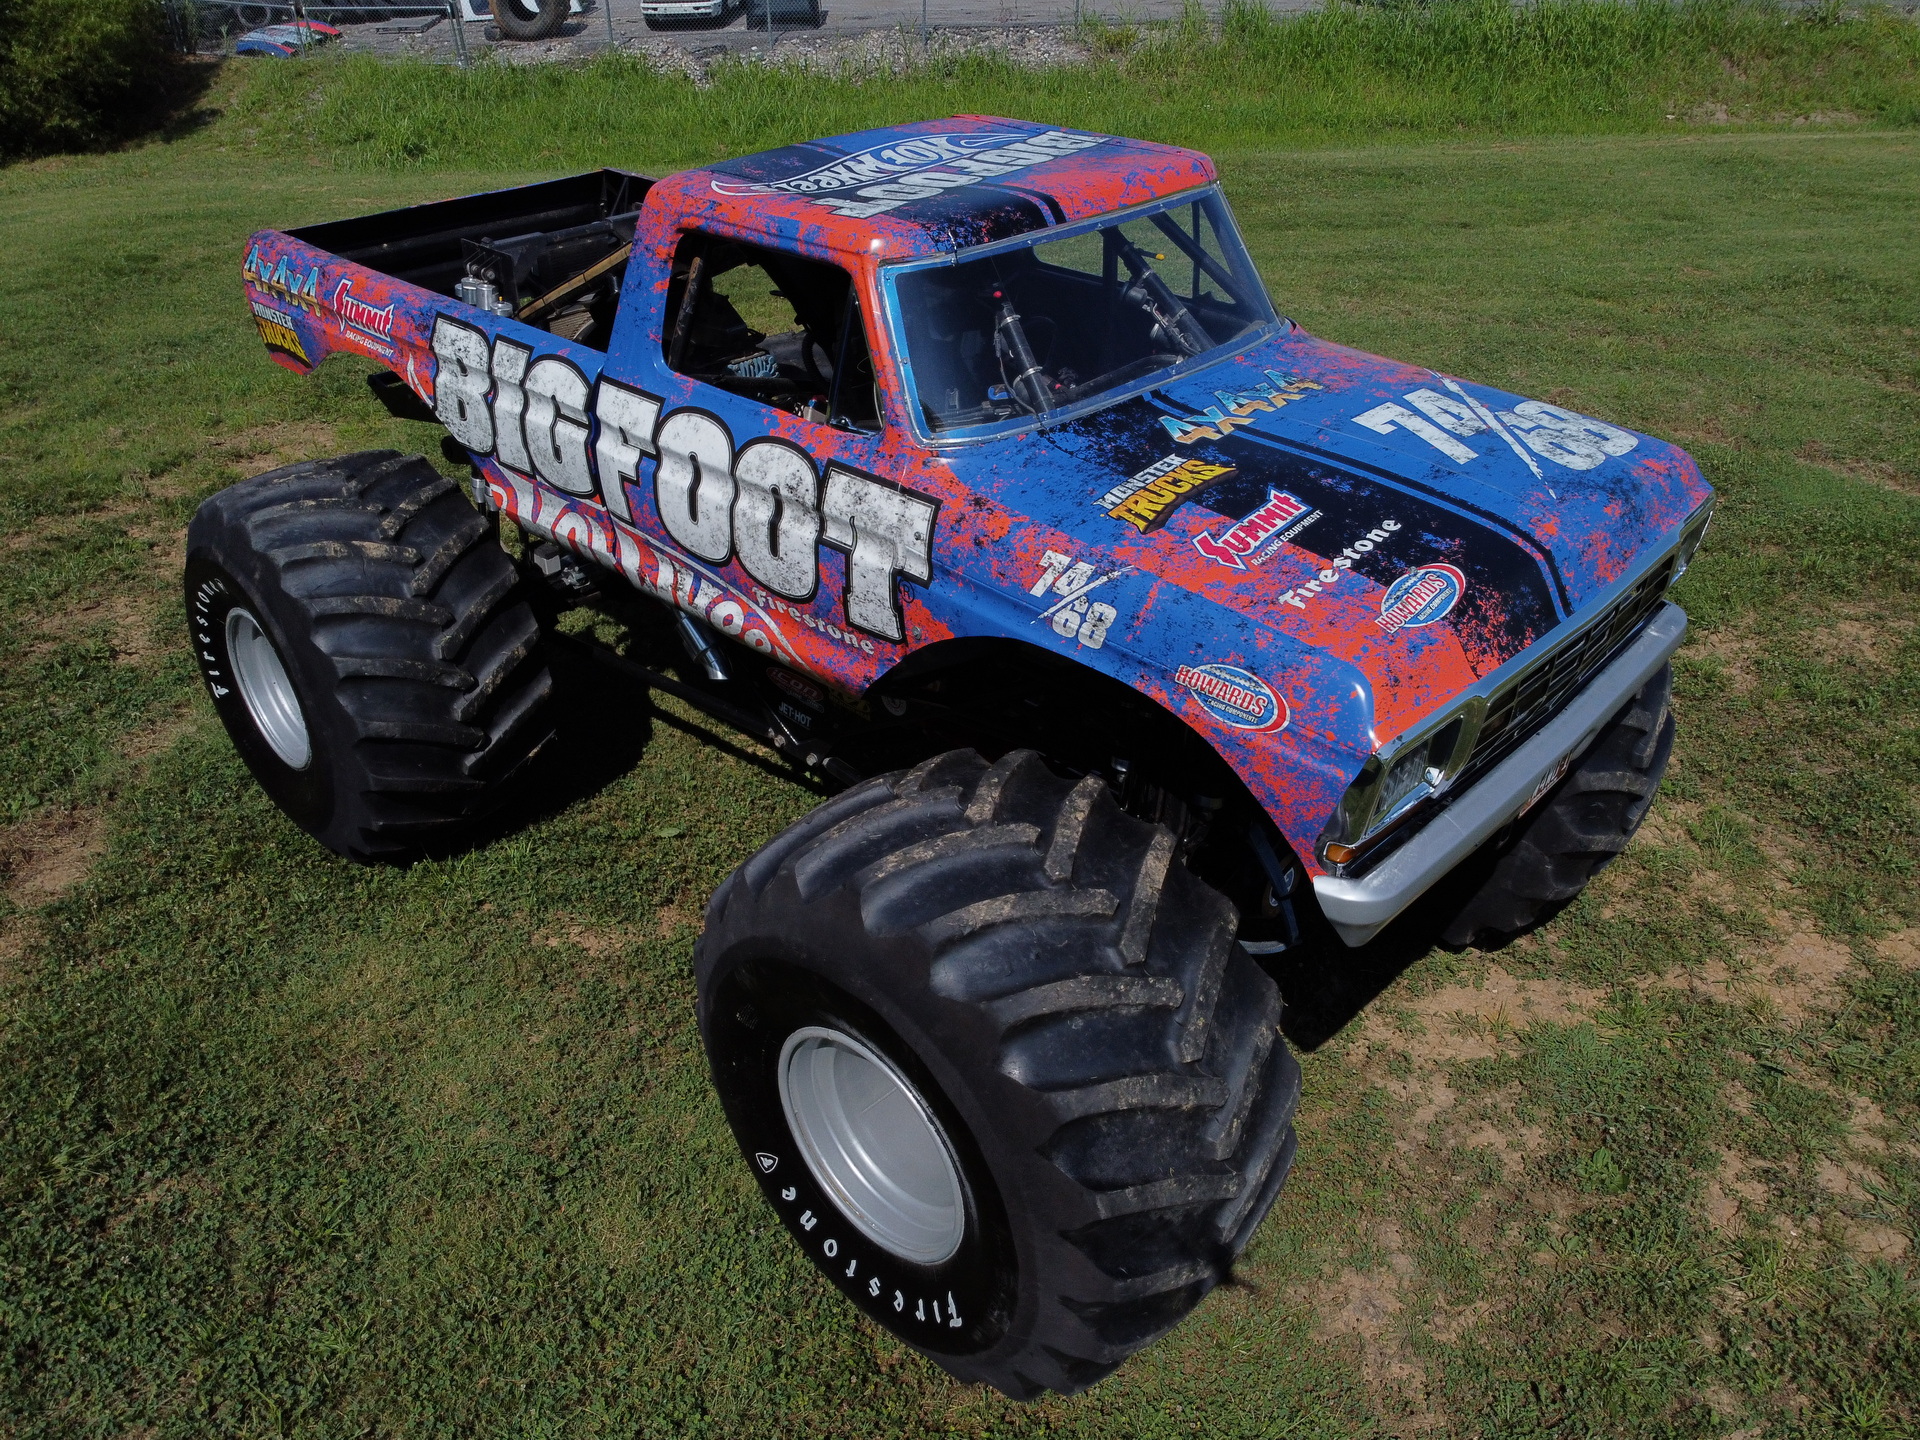 Hot Wheels Introduces Its New 12Foot Tall, 1,800 HP Monster Truck